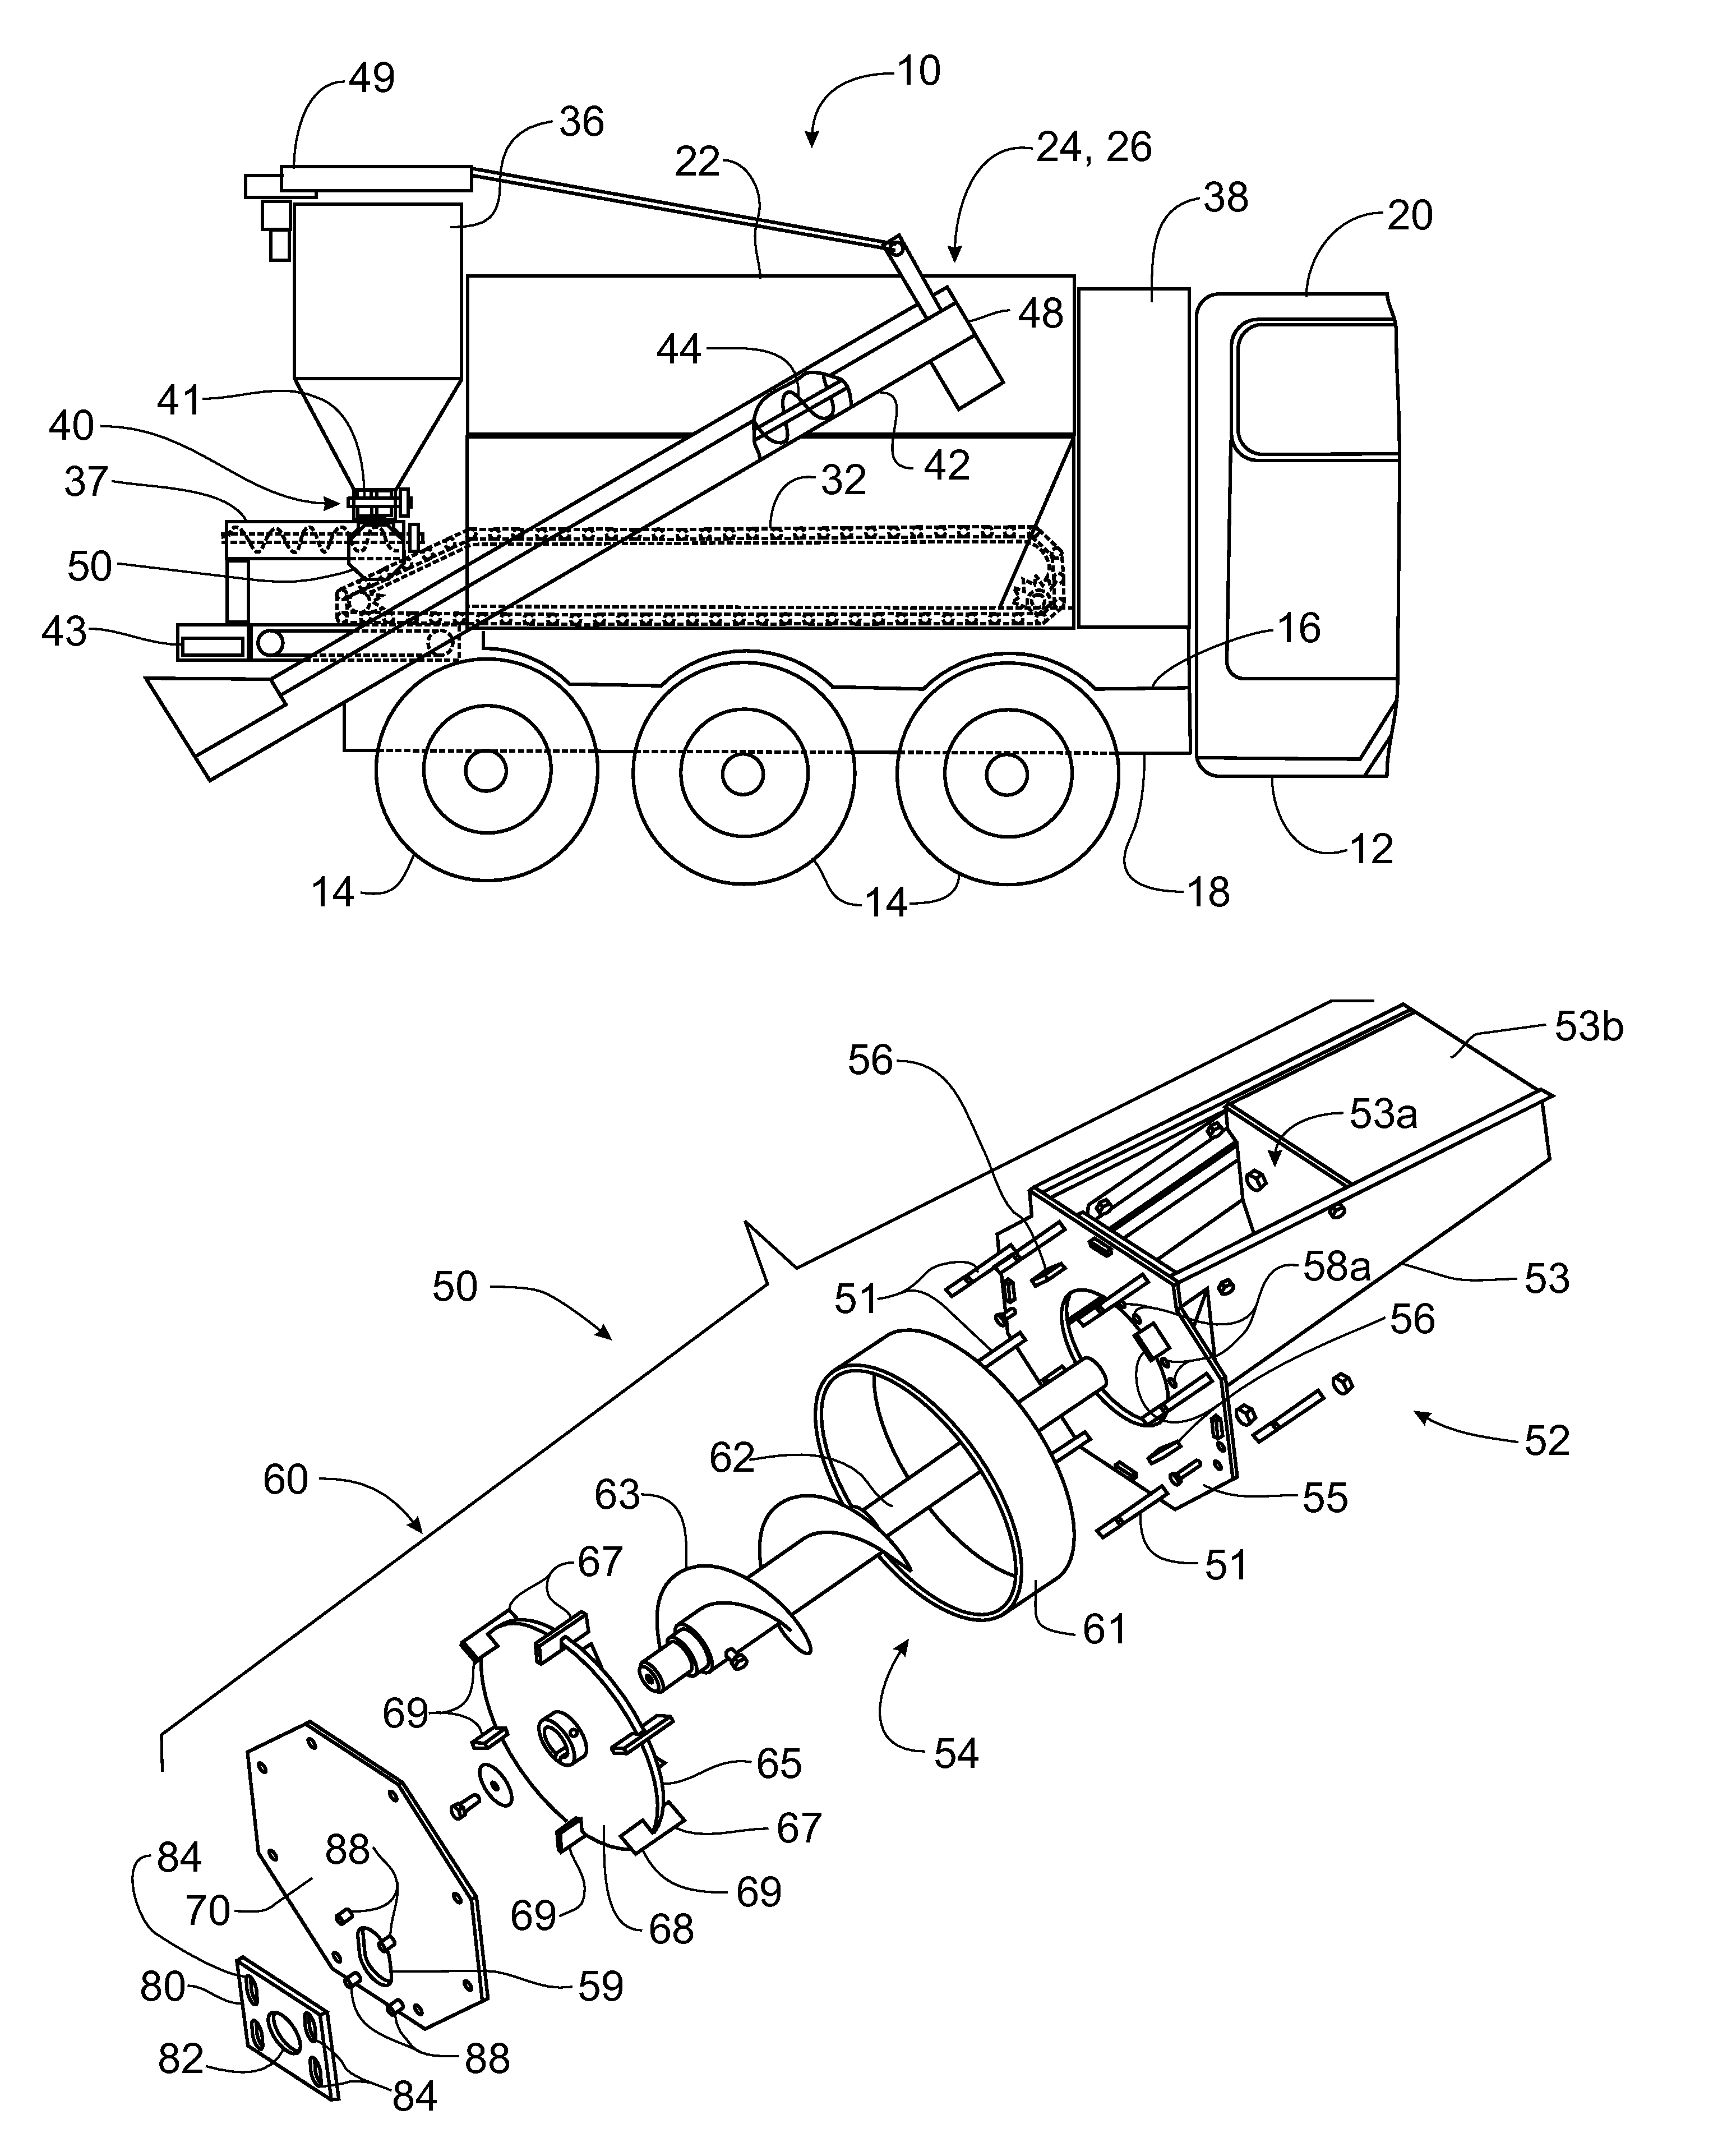 Method of mixing cement and water for concrete production